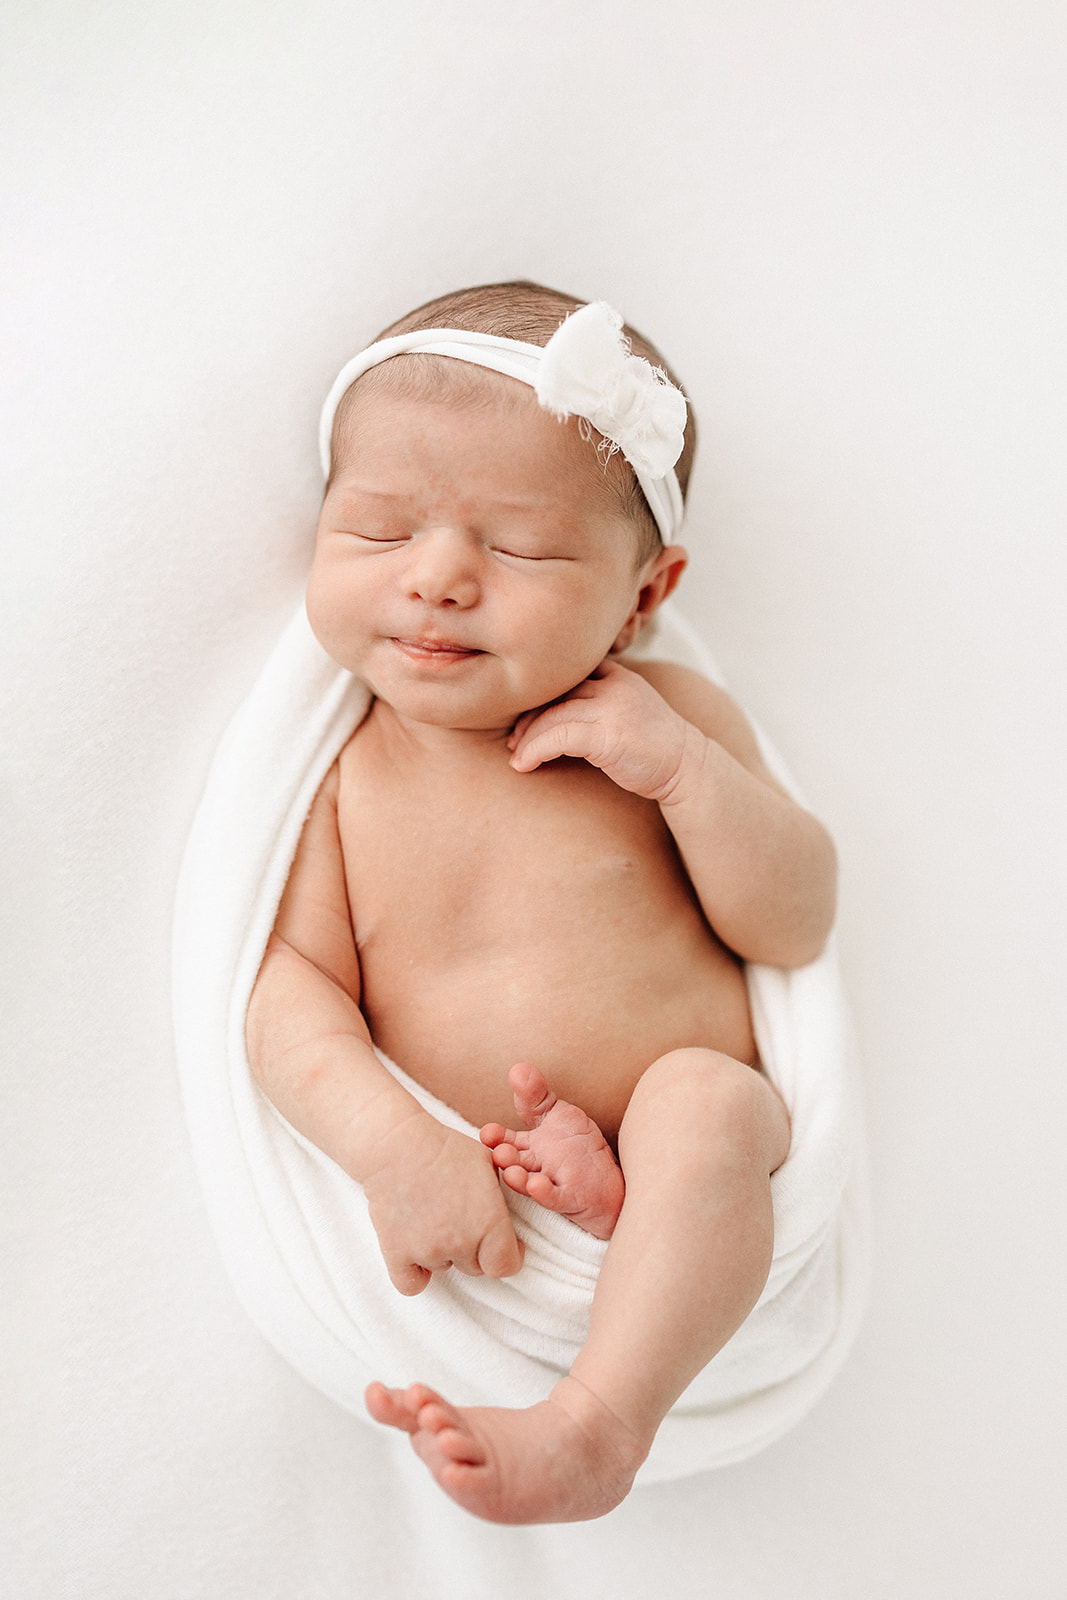 A newborn baby girl sleeps in a white blanket with a matching bow